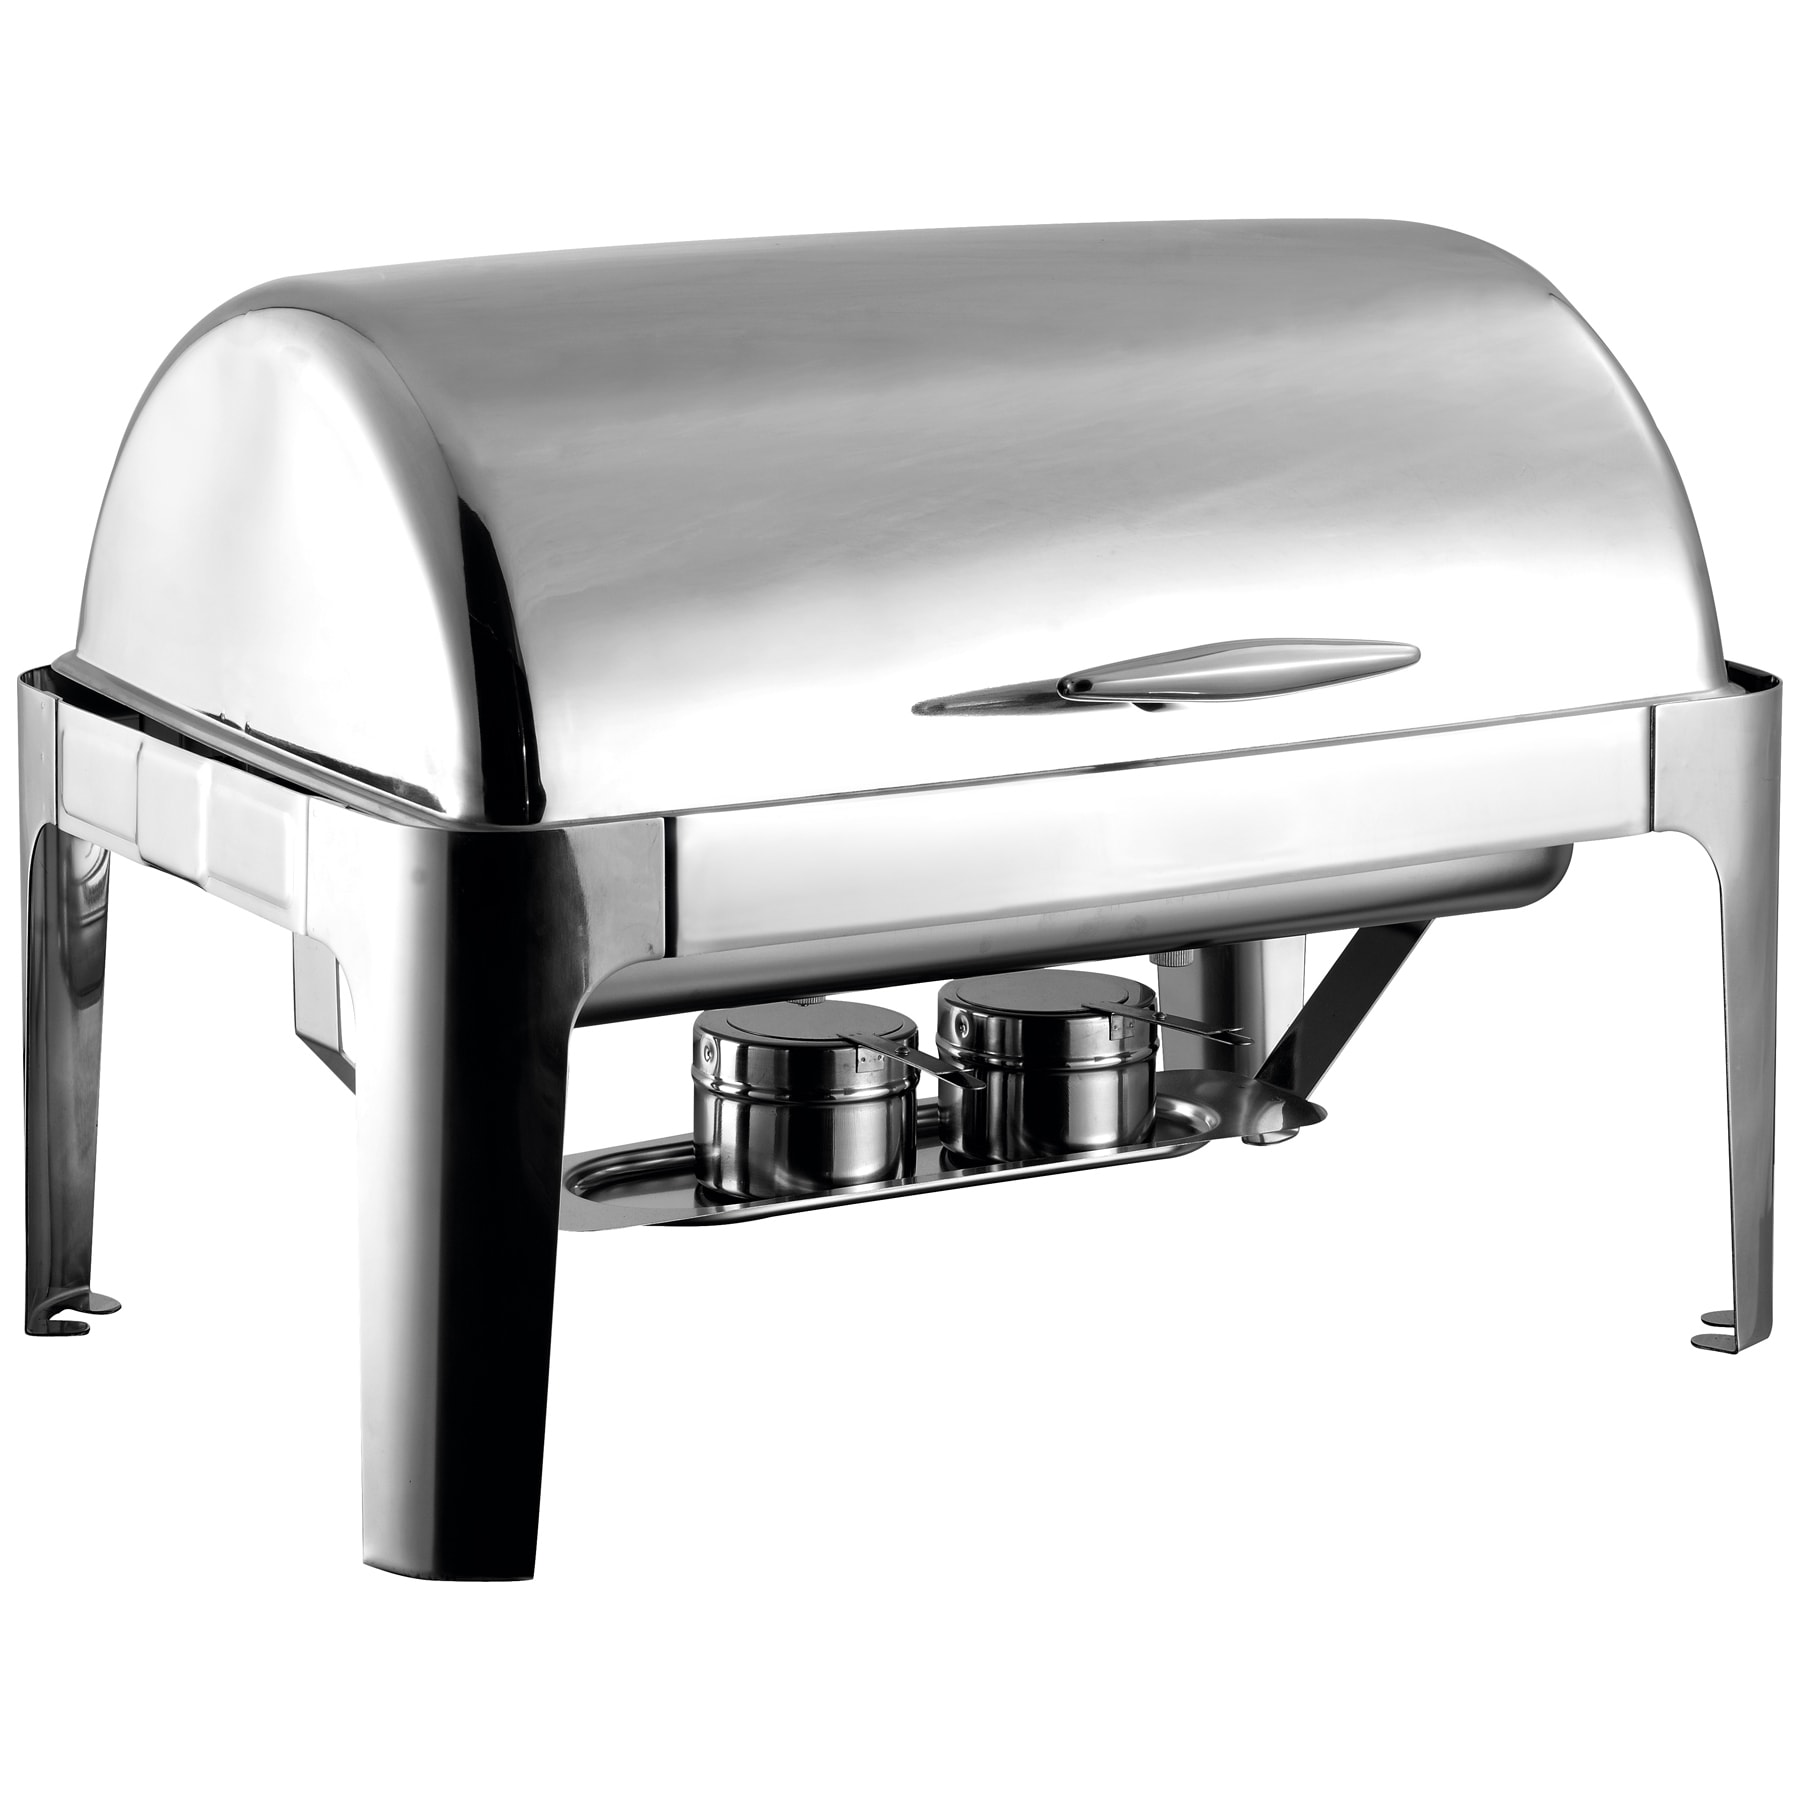 Darling Food Service Roll Top Full Size Chafer